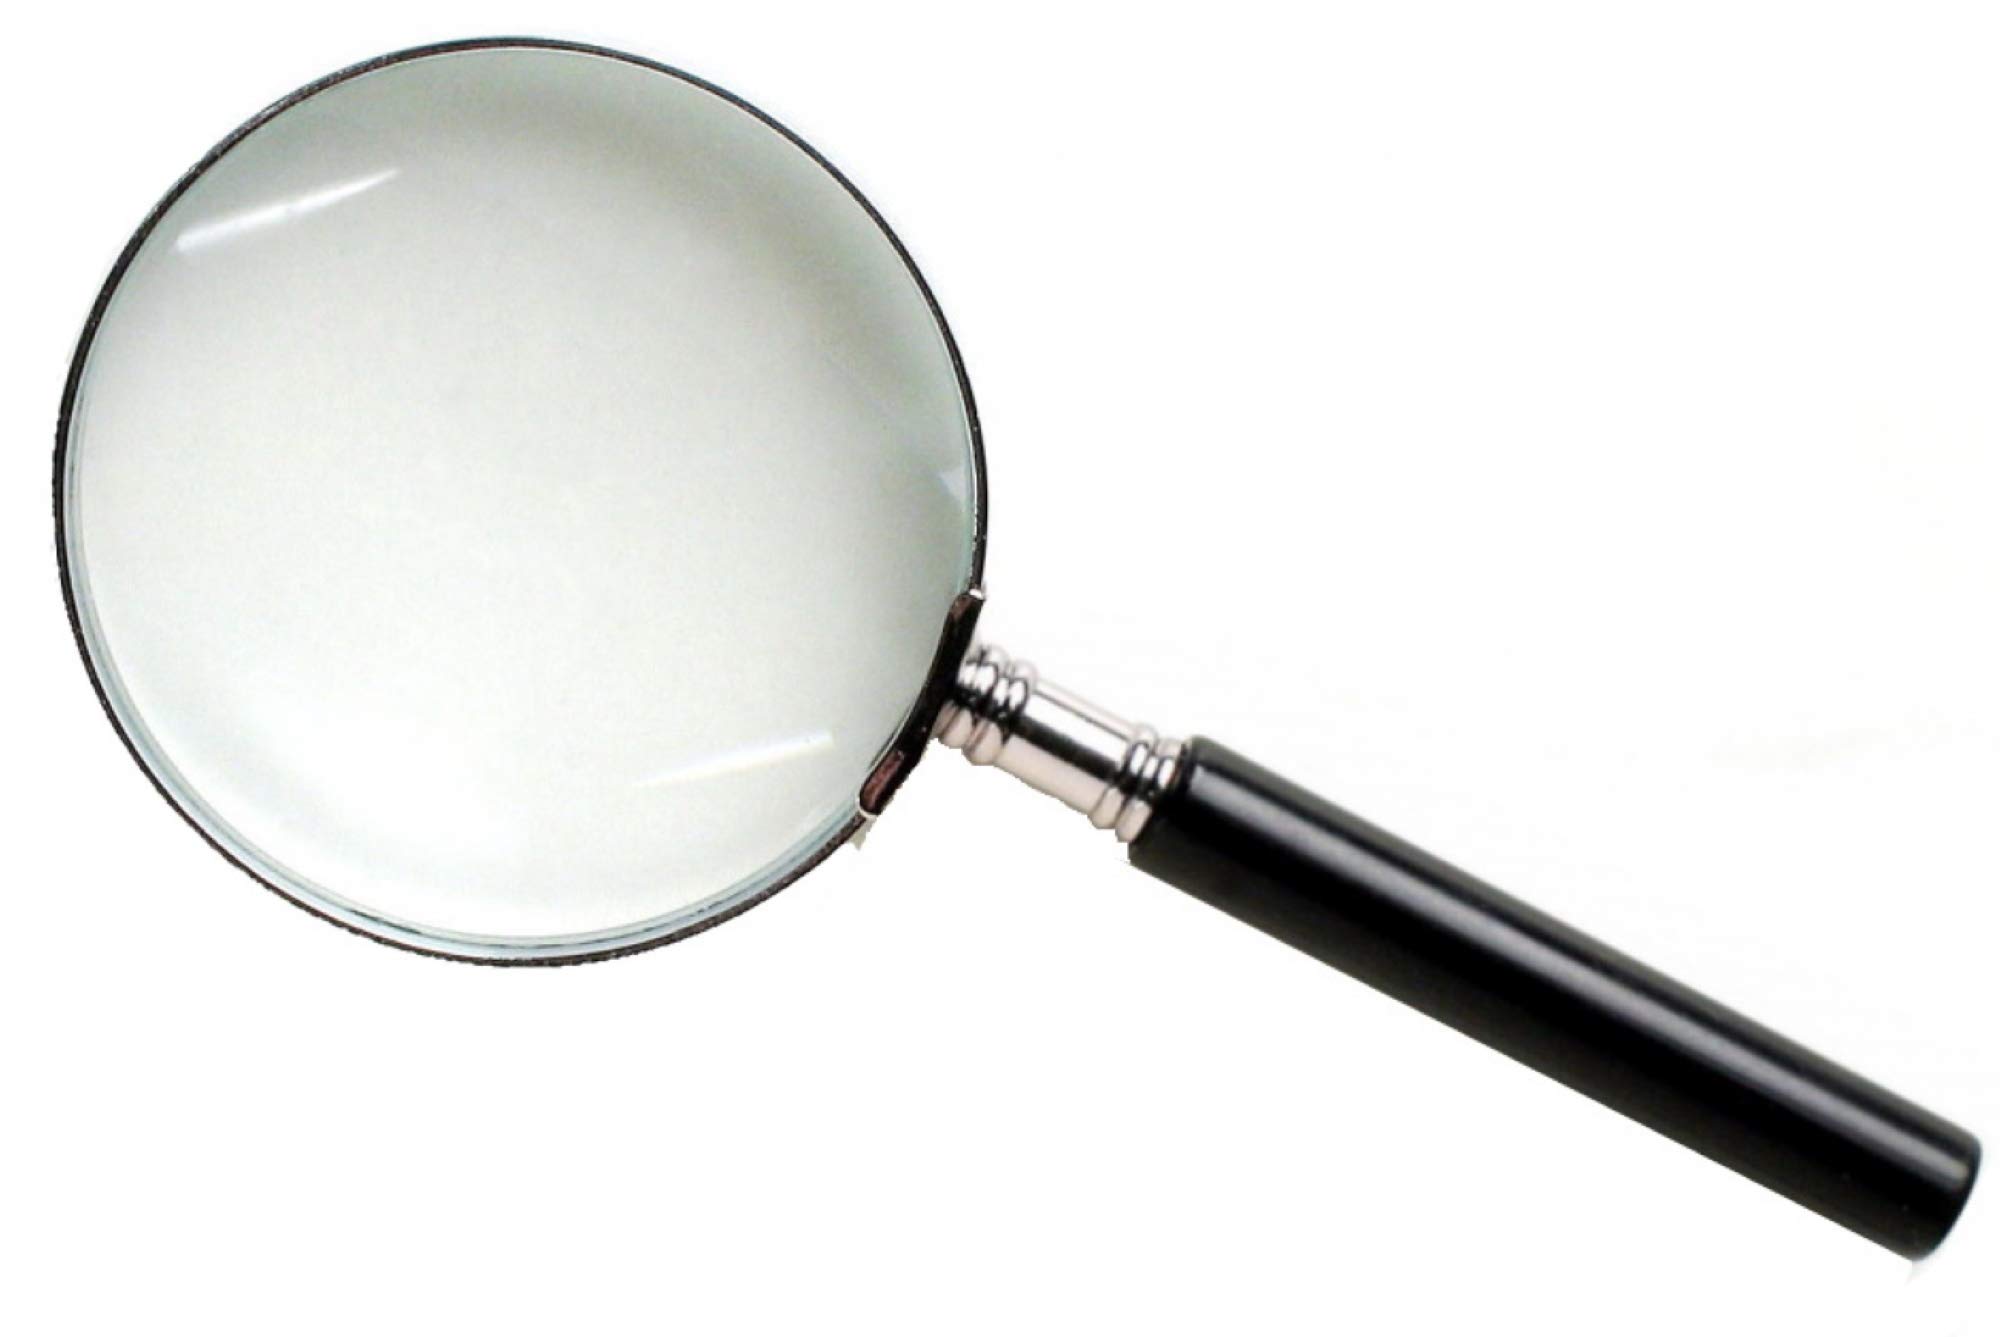 A magnifying glass examining a worm